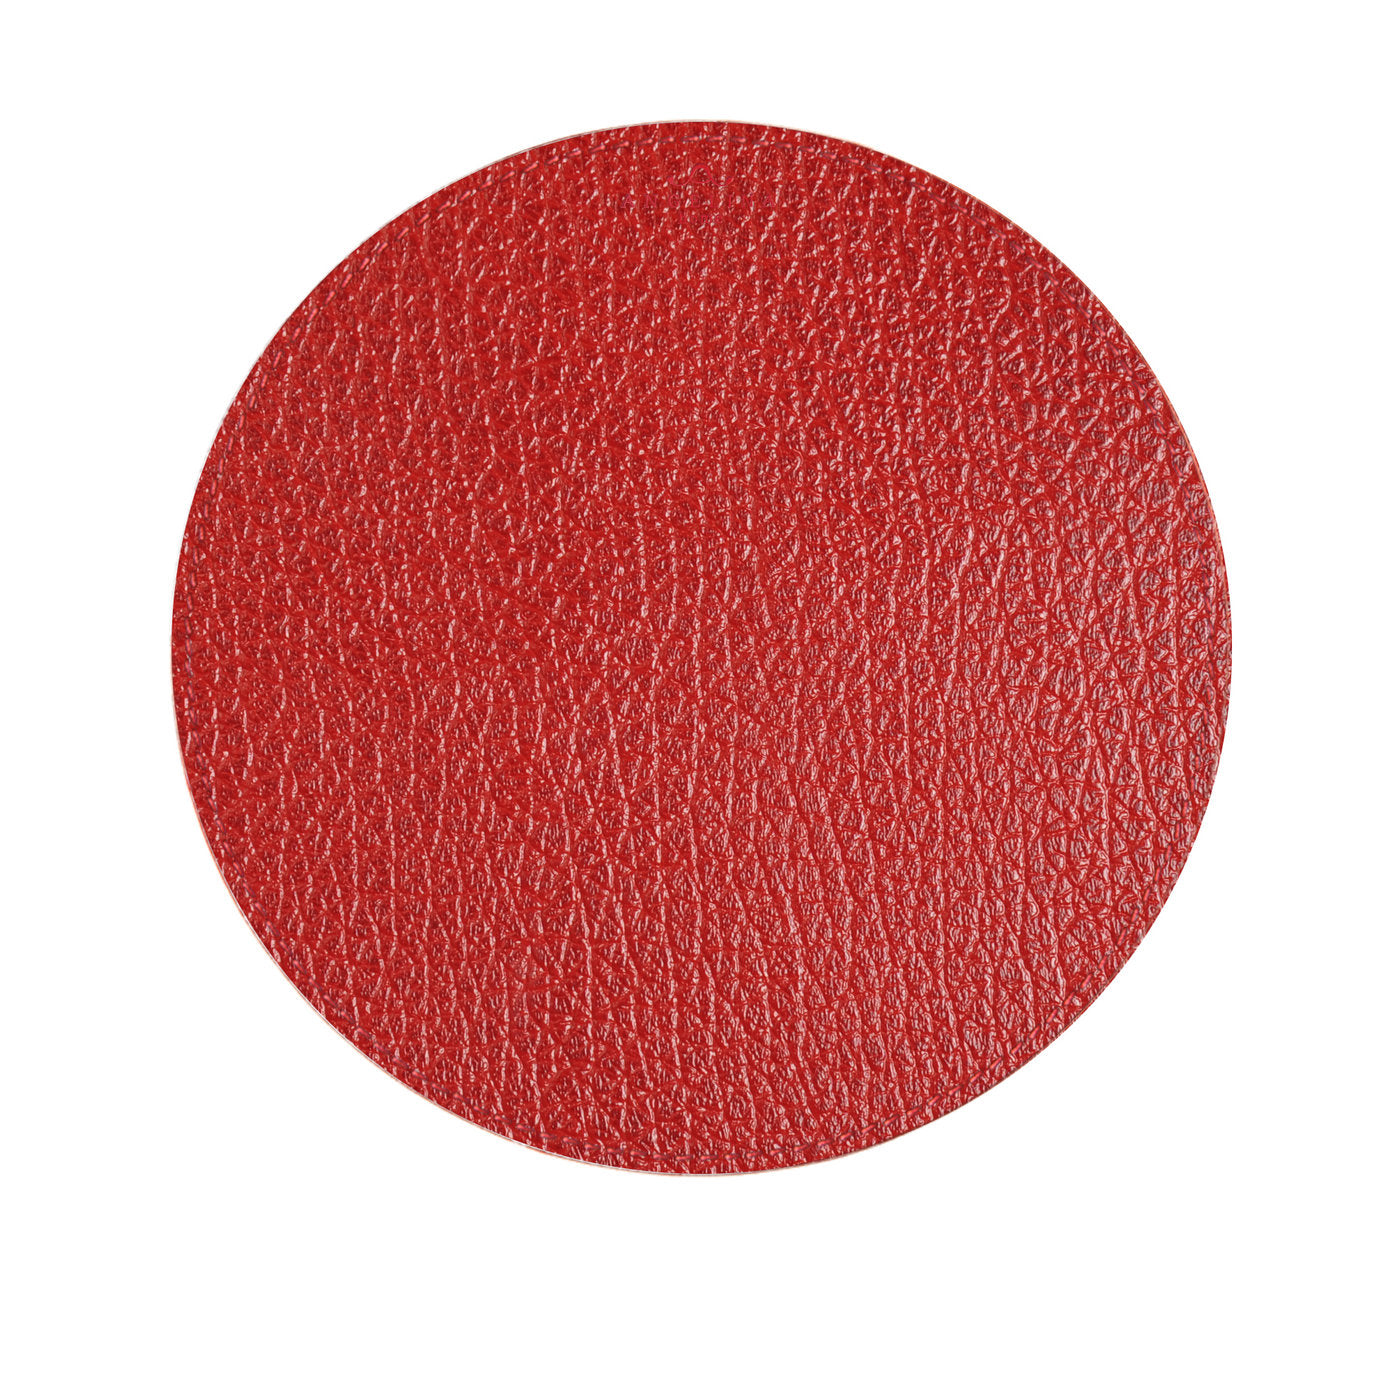 Tanzania Medium Set of 2 Round Red Leather Placemats - Alternative view 1